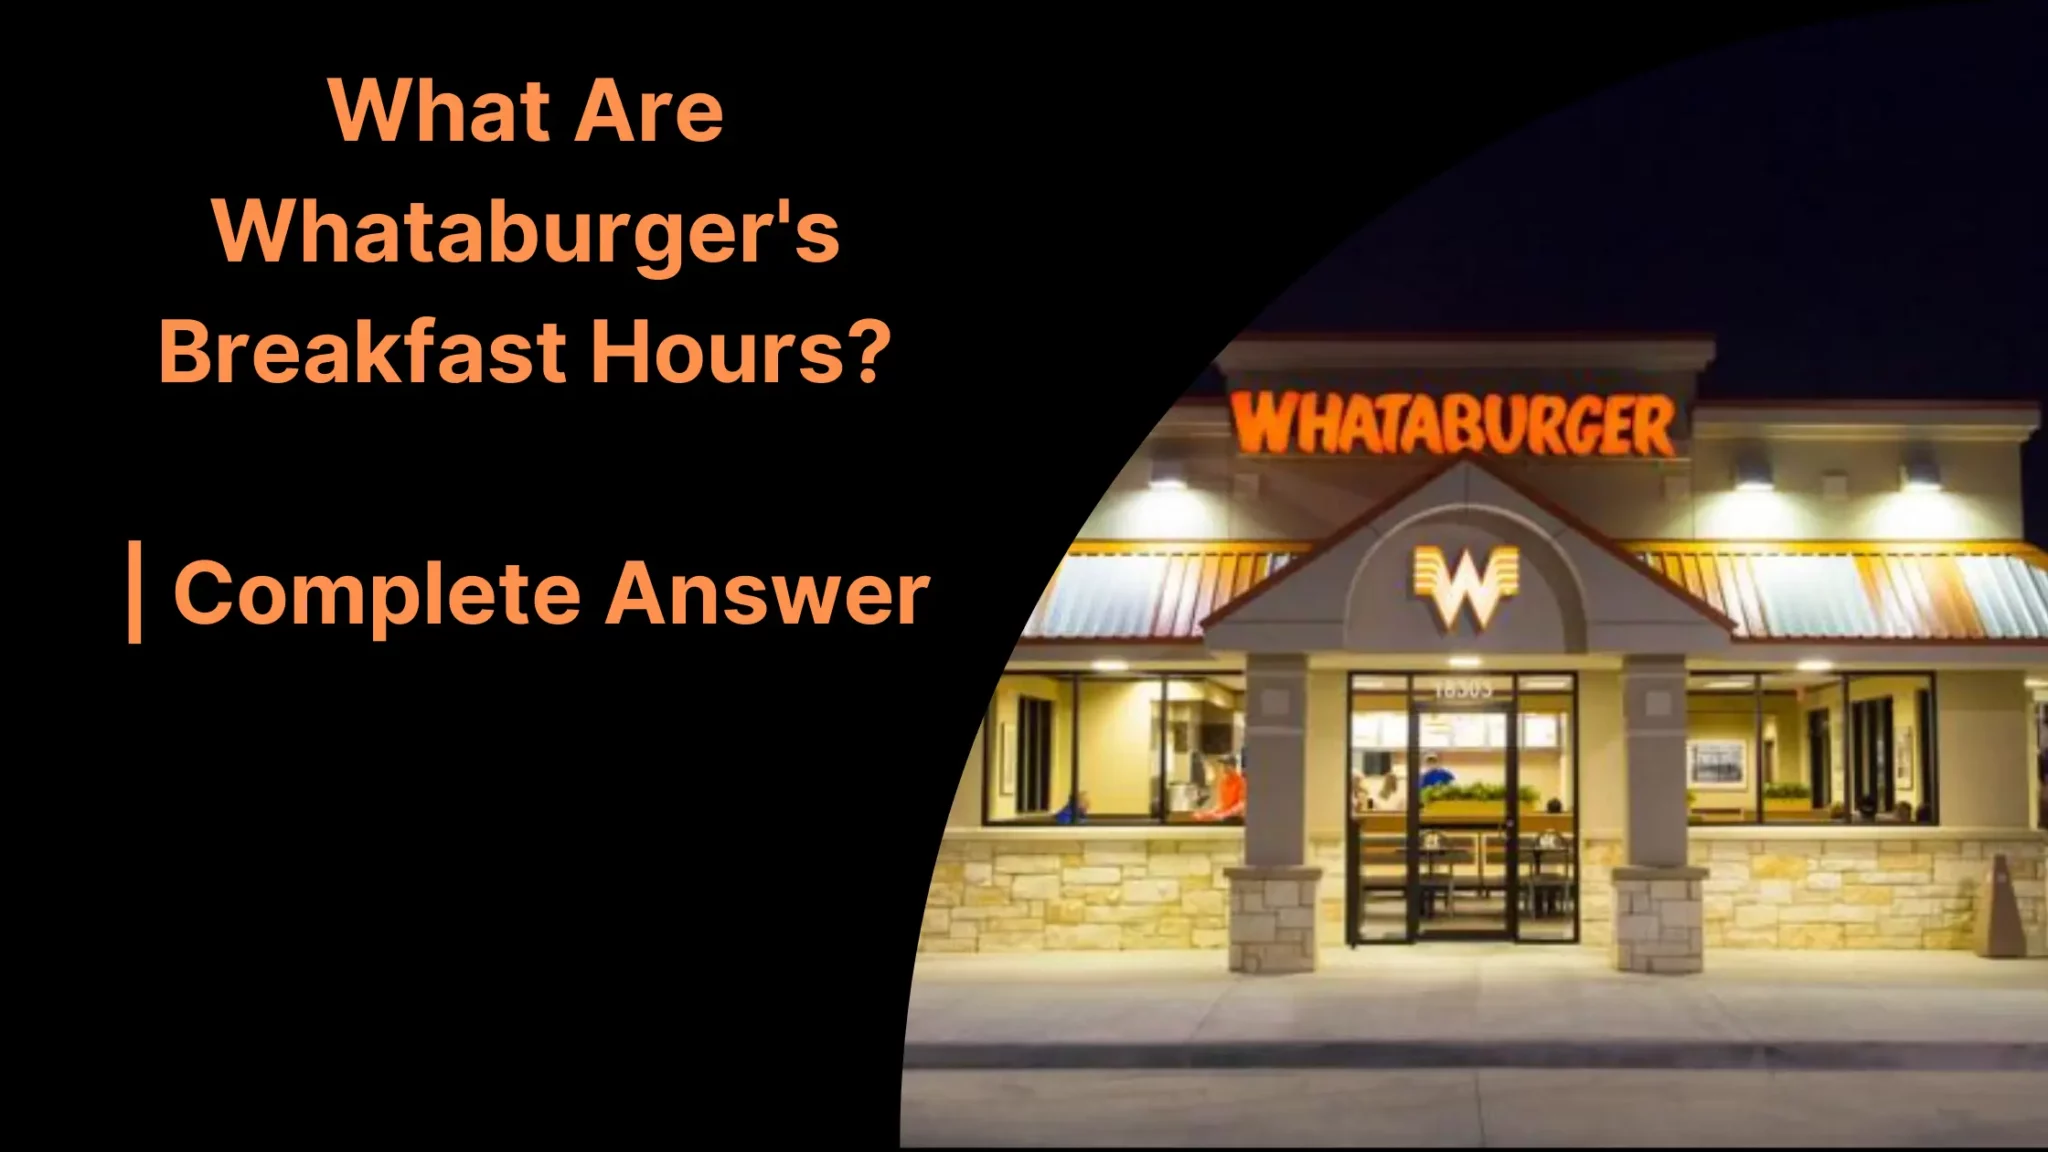 What Are Whataburger's Breakfast Hours?